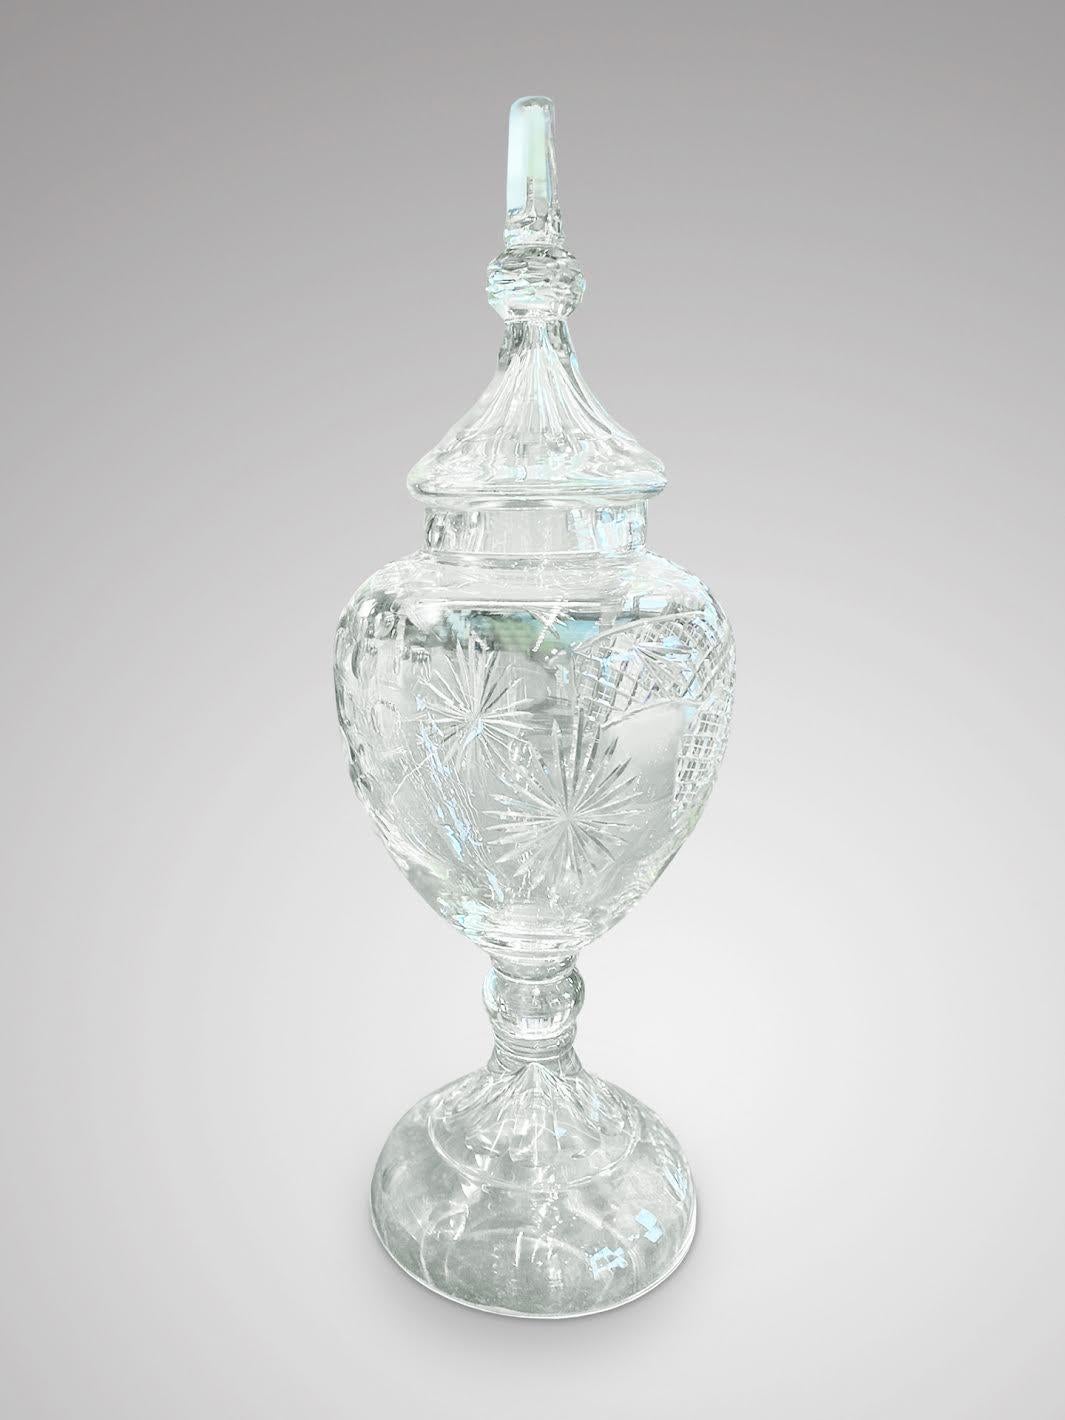 An impressive early 20th century tall cut glass apothecary vase with original cover. All in perfect original condition.

The dimensions are:
Height: 95cm (37.4in)
Diameter: 27cm (10.6in)

The tall cut glass vase is in good antique condition